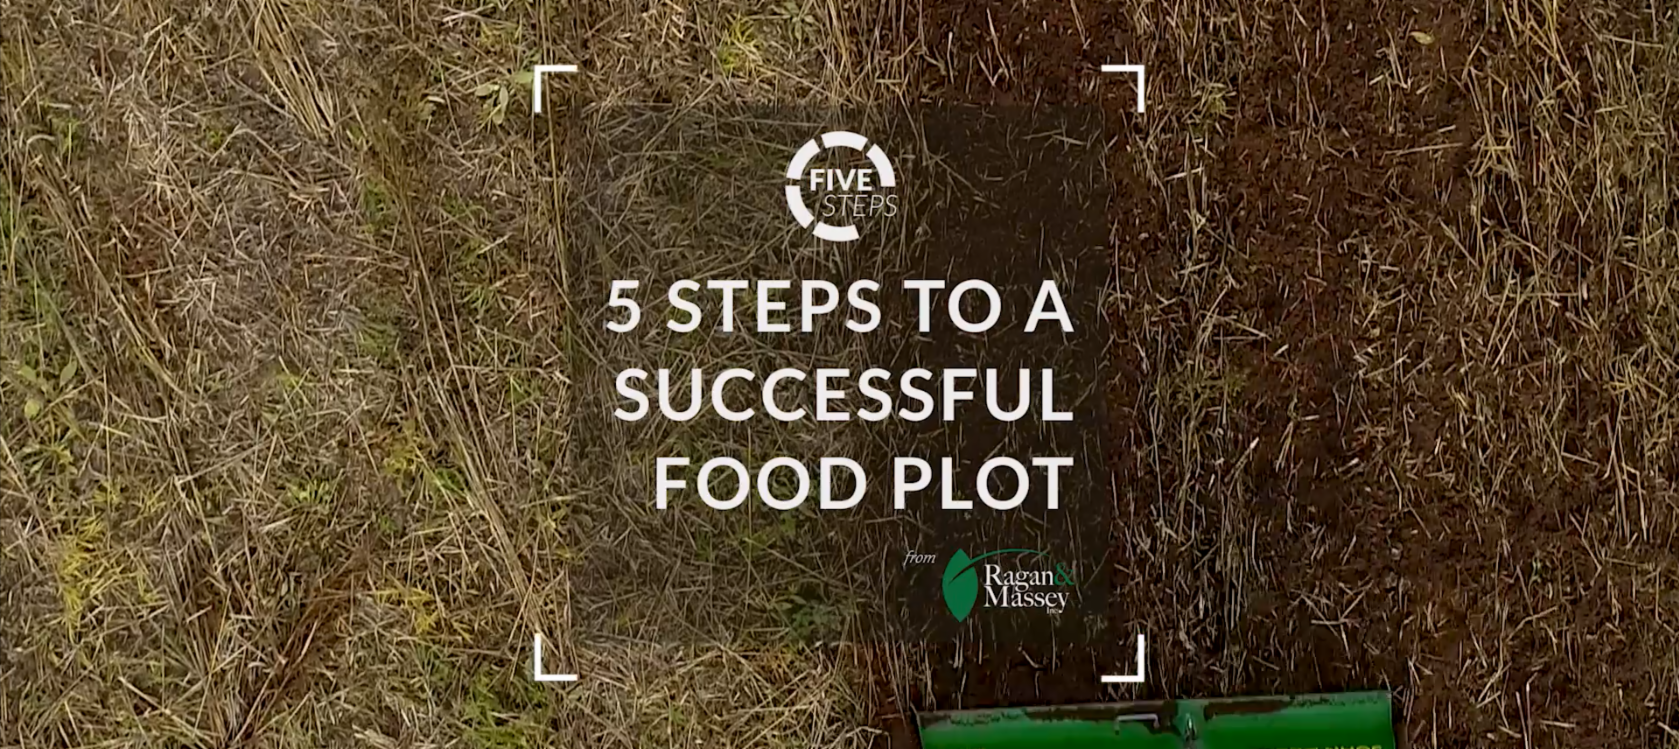 5 Steps to a Successful Food Plot